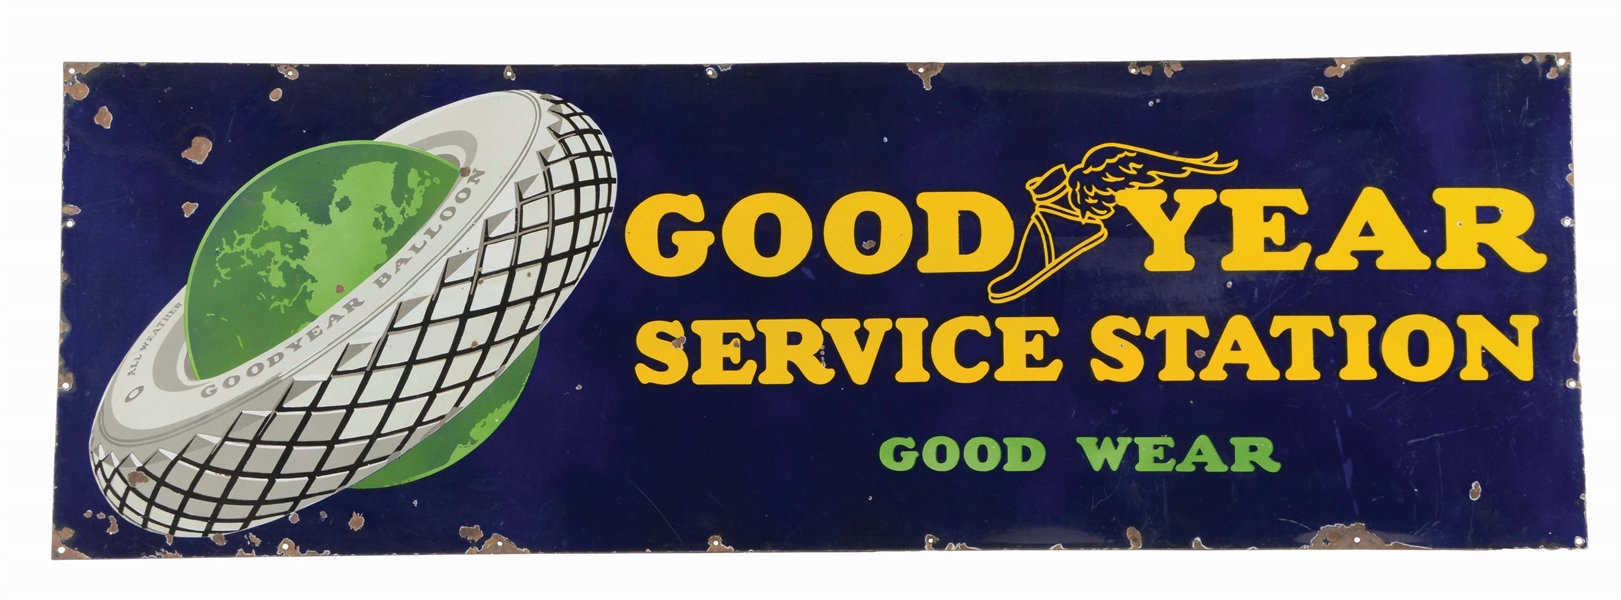 GOODYEAR TIRES SERVICE STATION PORCELAIN SIGN W/ GREEN GLOBE GRAPHIC.